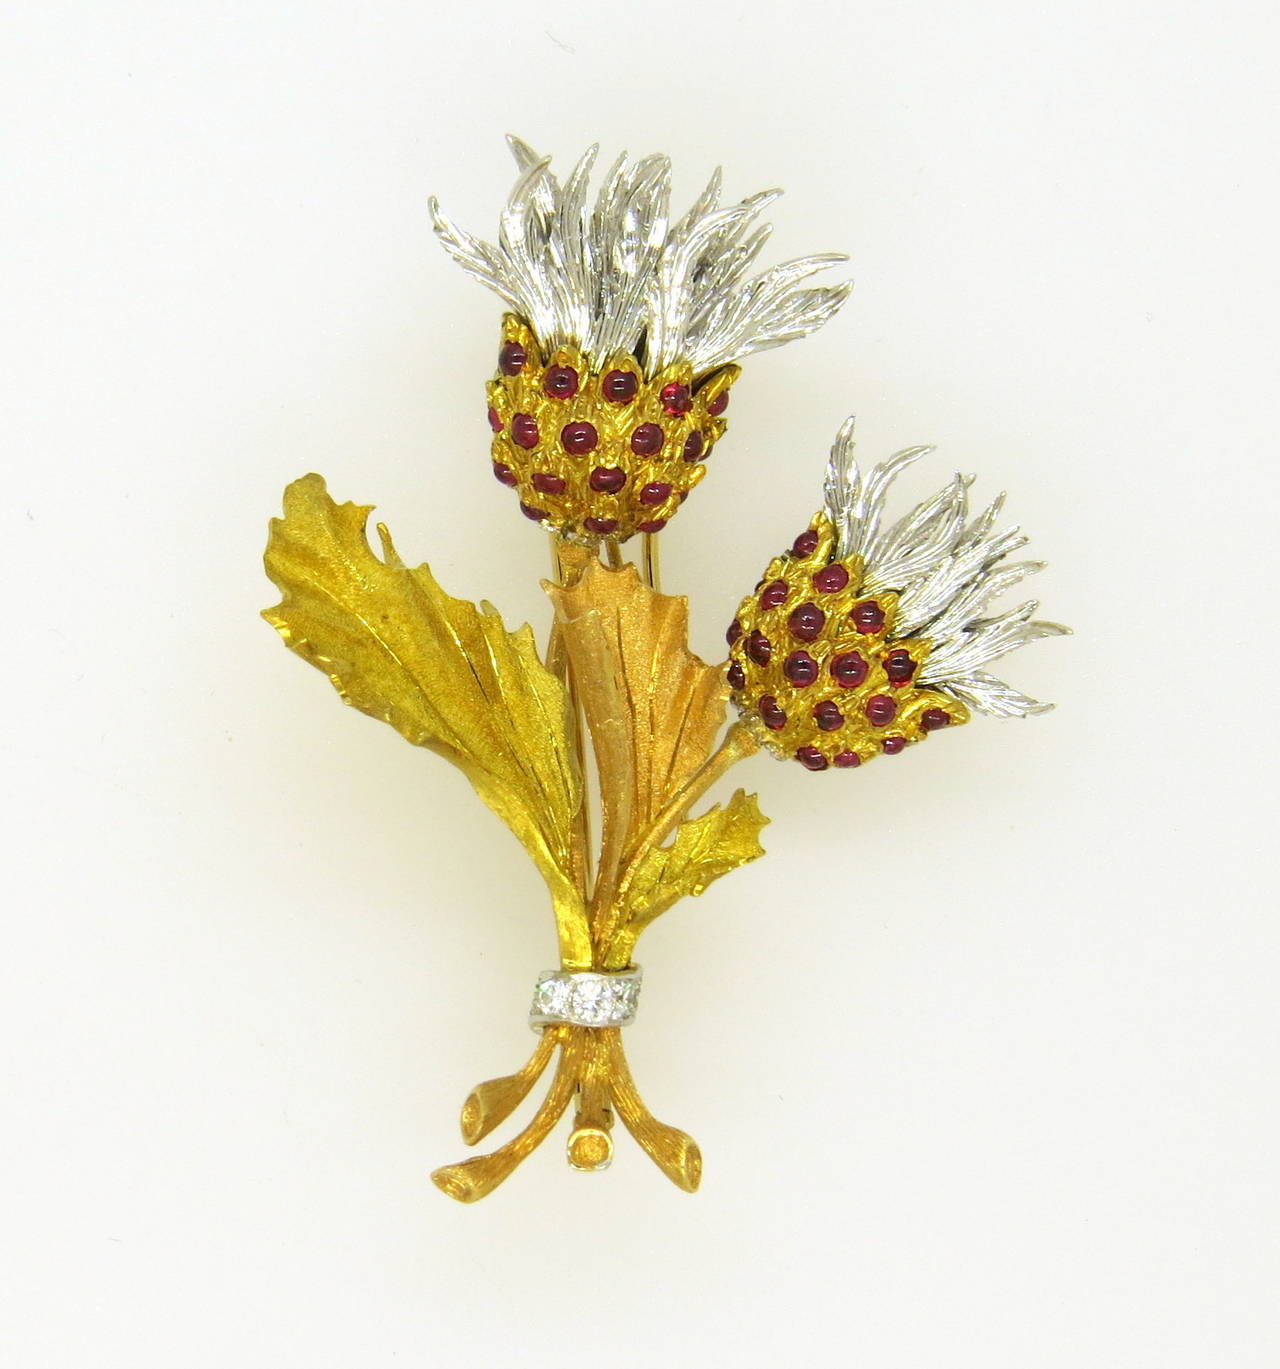 Buccellati 18k white, yellow and rose gold thistle brooch, set with diamonds and ruby cabochons. Brooch is 65mm x 52mm. Marked Buccellati Italy. weight - 30.4 gr